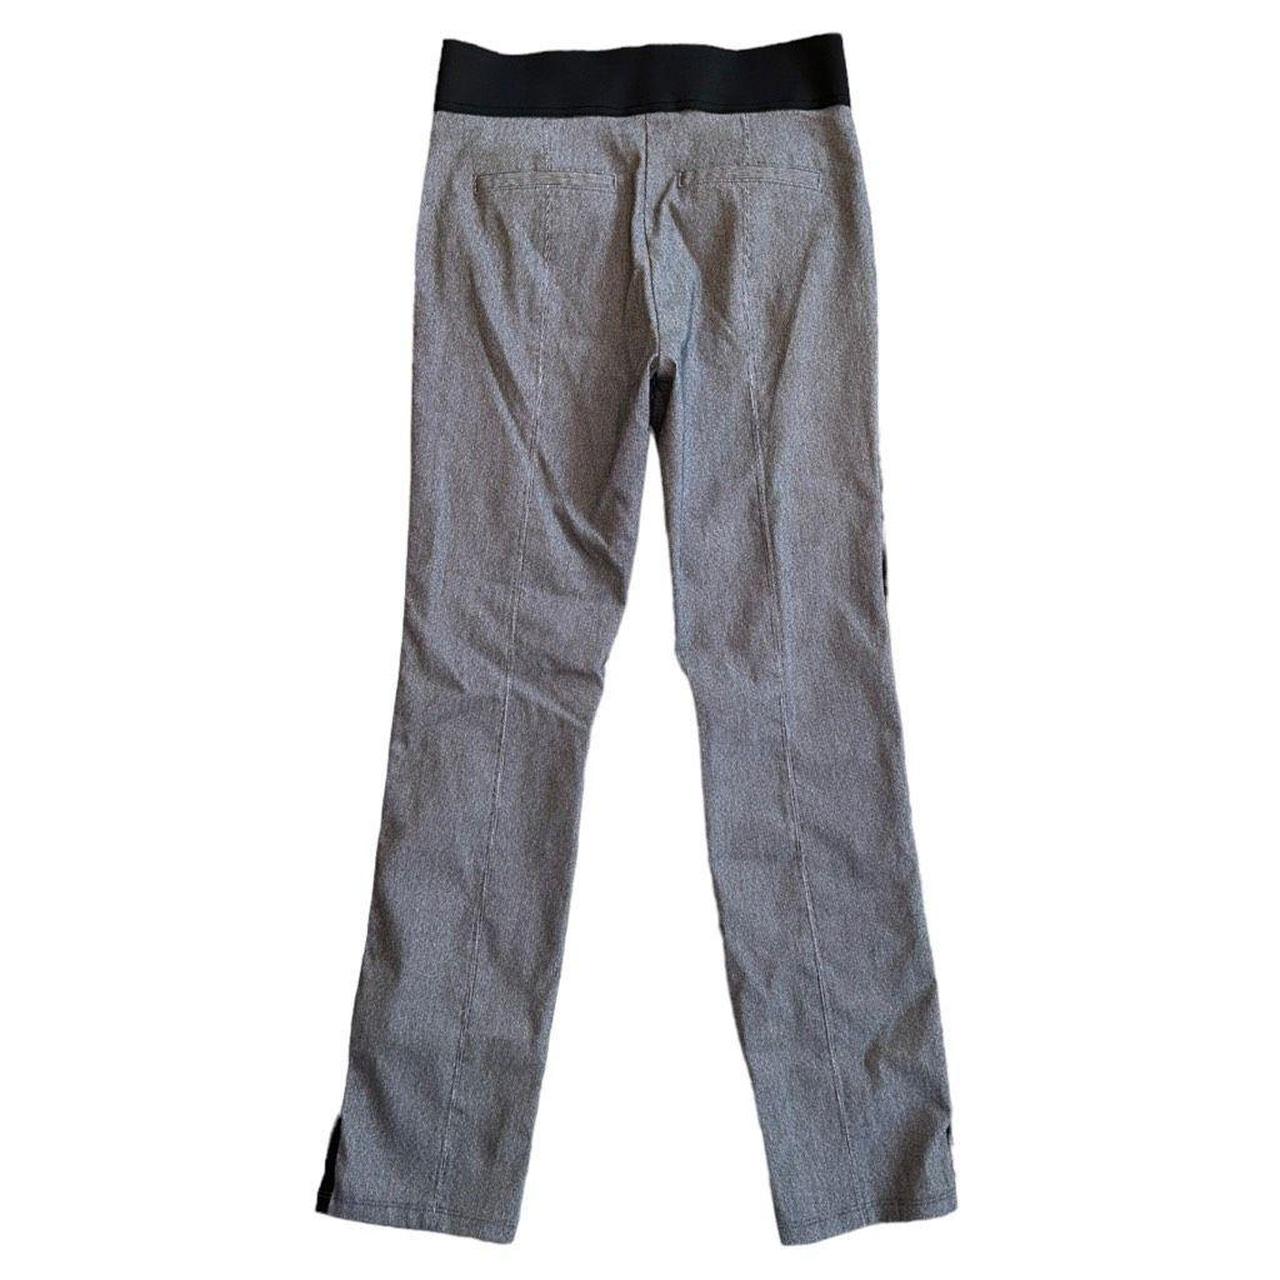 Women's Simply Vera Vera Wang Pull-On Ankle Pants